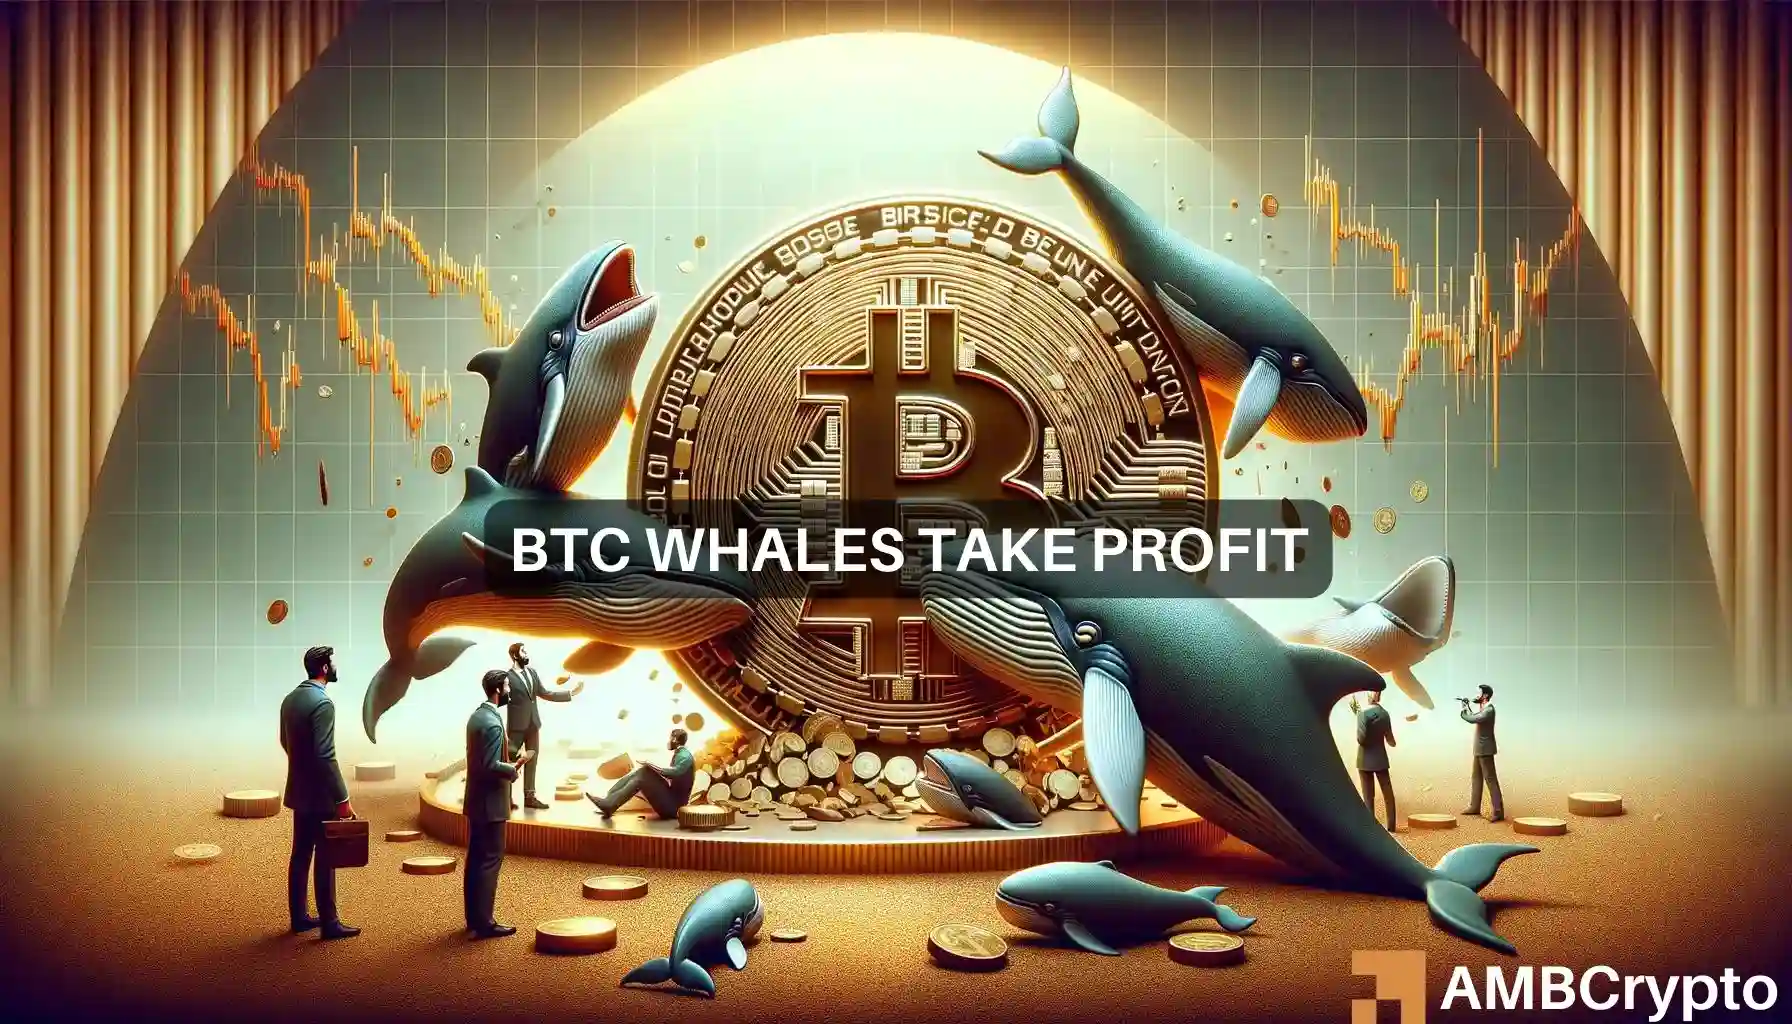 Bitcoin under $64,000 – Watch these whales to look for reversal signs